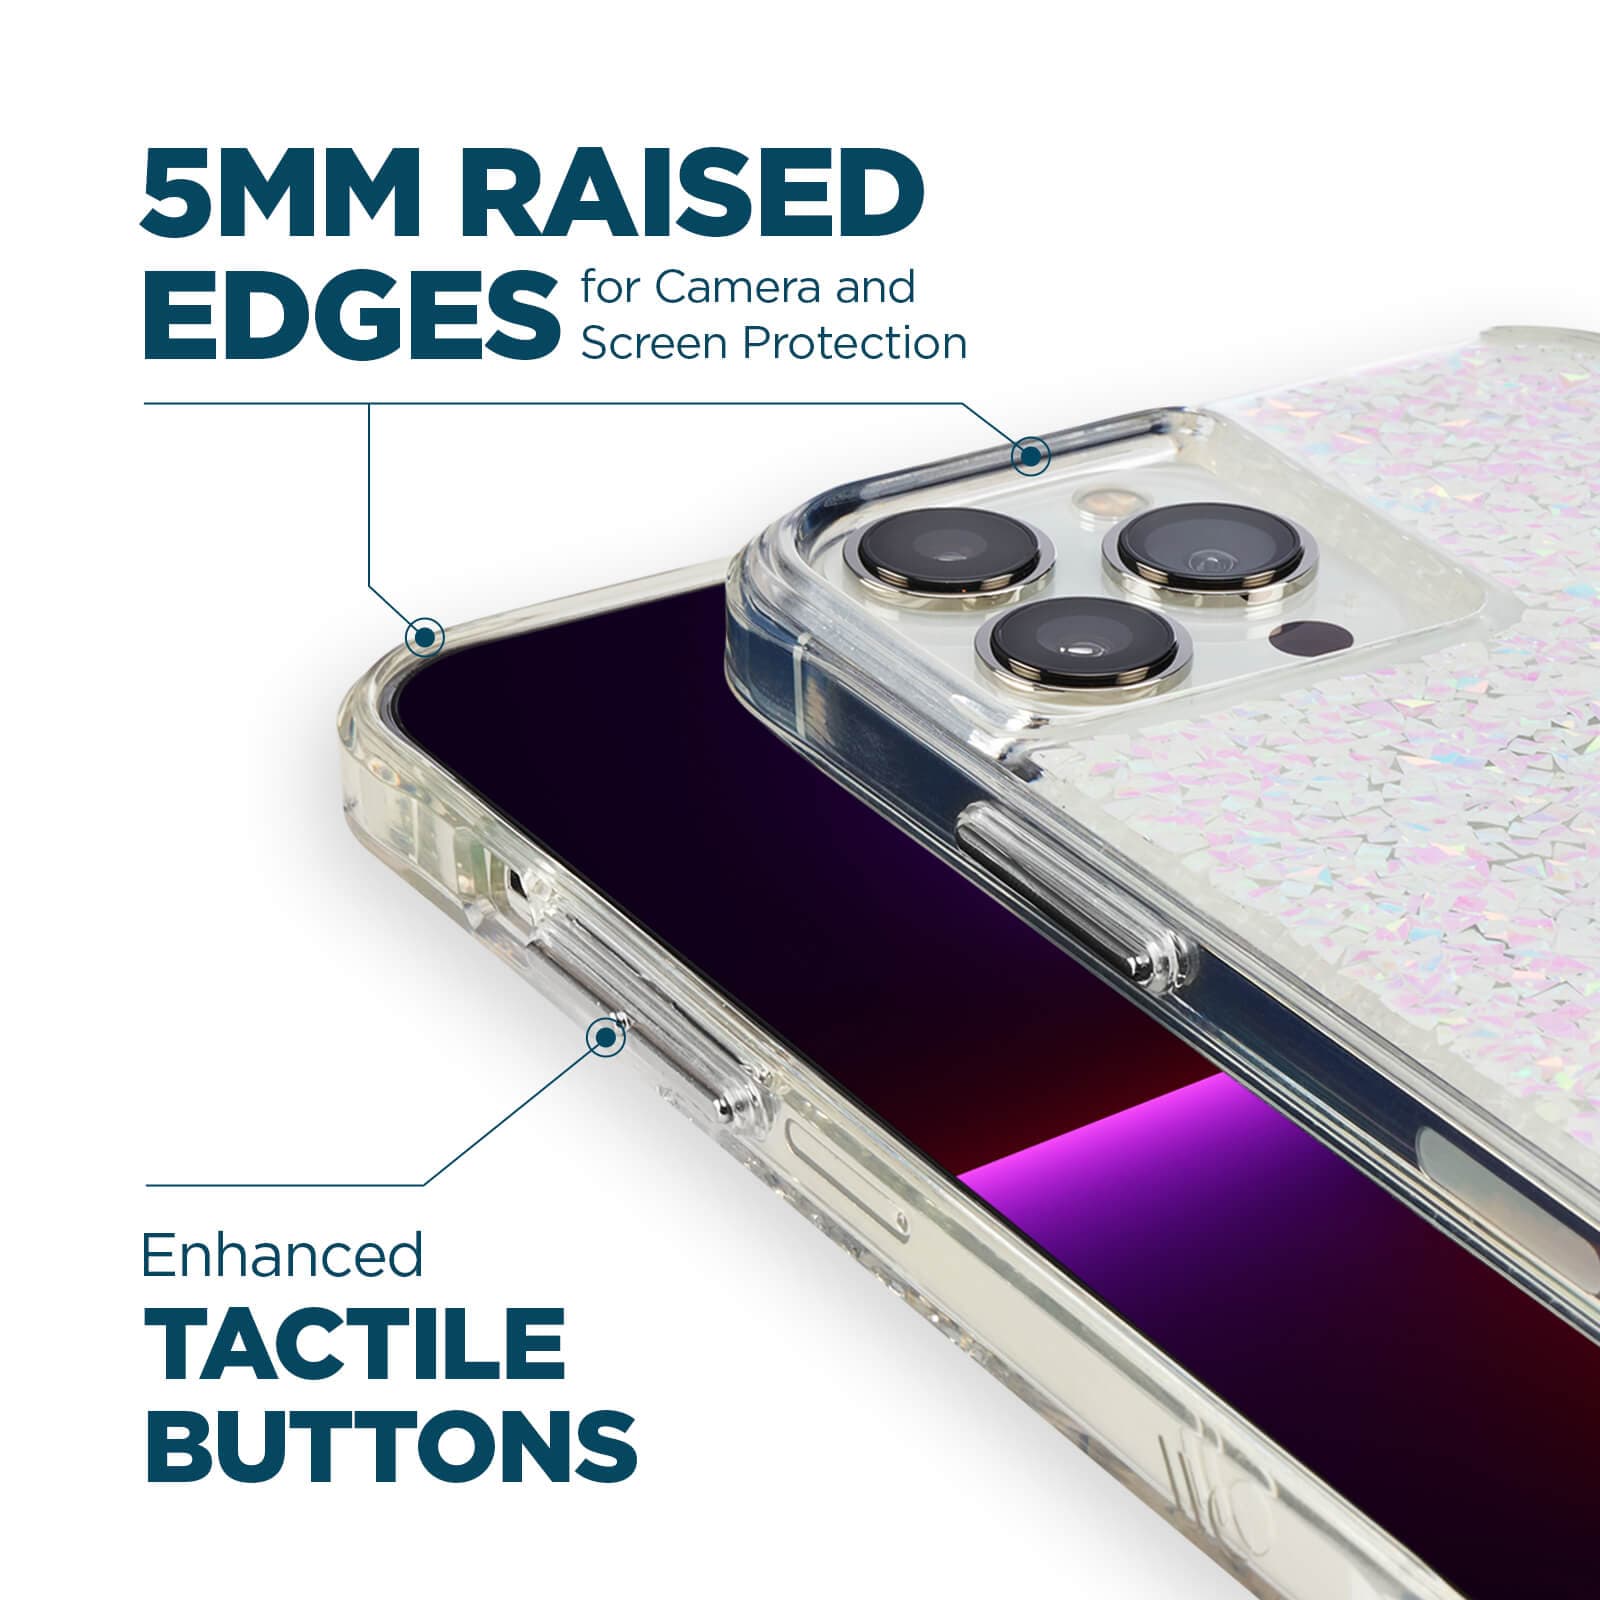 5mm raised edges for camera and screen protection. Enhanced tactile buttons. color::Twinkle Diamond